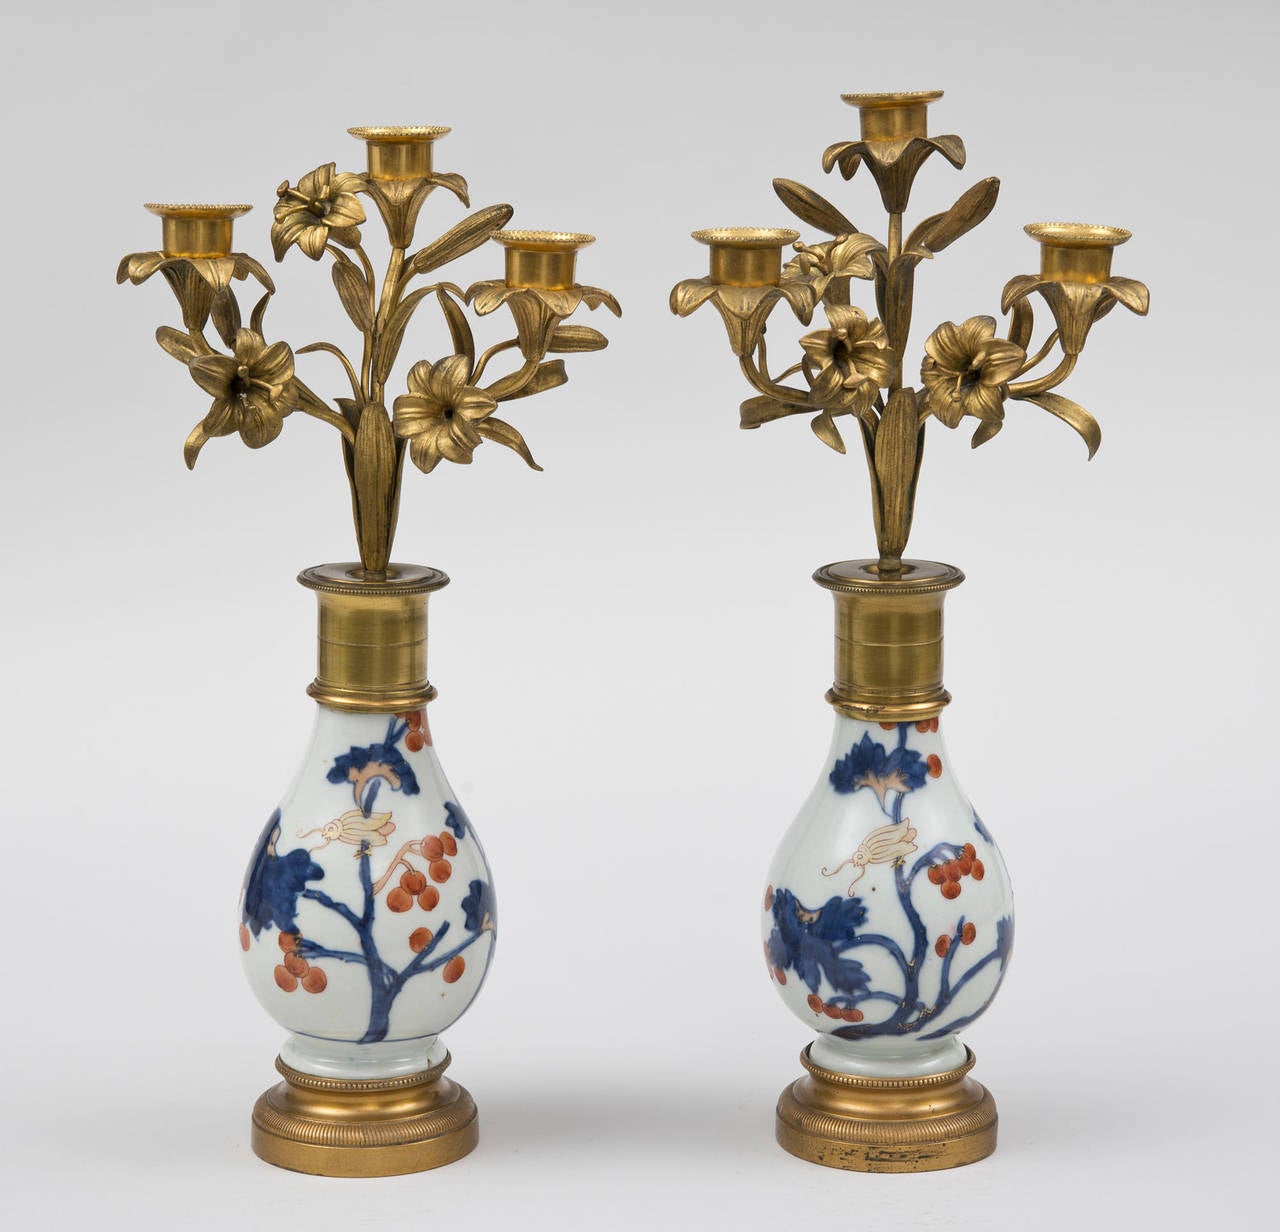 Pair of Louis XVI style gilt metal three-light candelabrum on baluster-shaped “Imari” porcelain stands decorated with blue flowers, red berries and insects; the fruit and foliate stems supporting the lily-form arms. Raised on gilt metal bases.

 